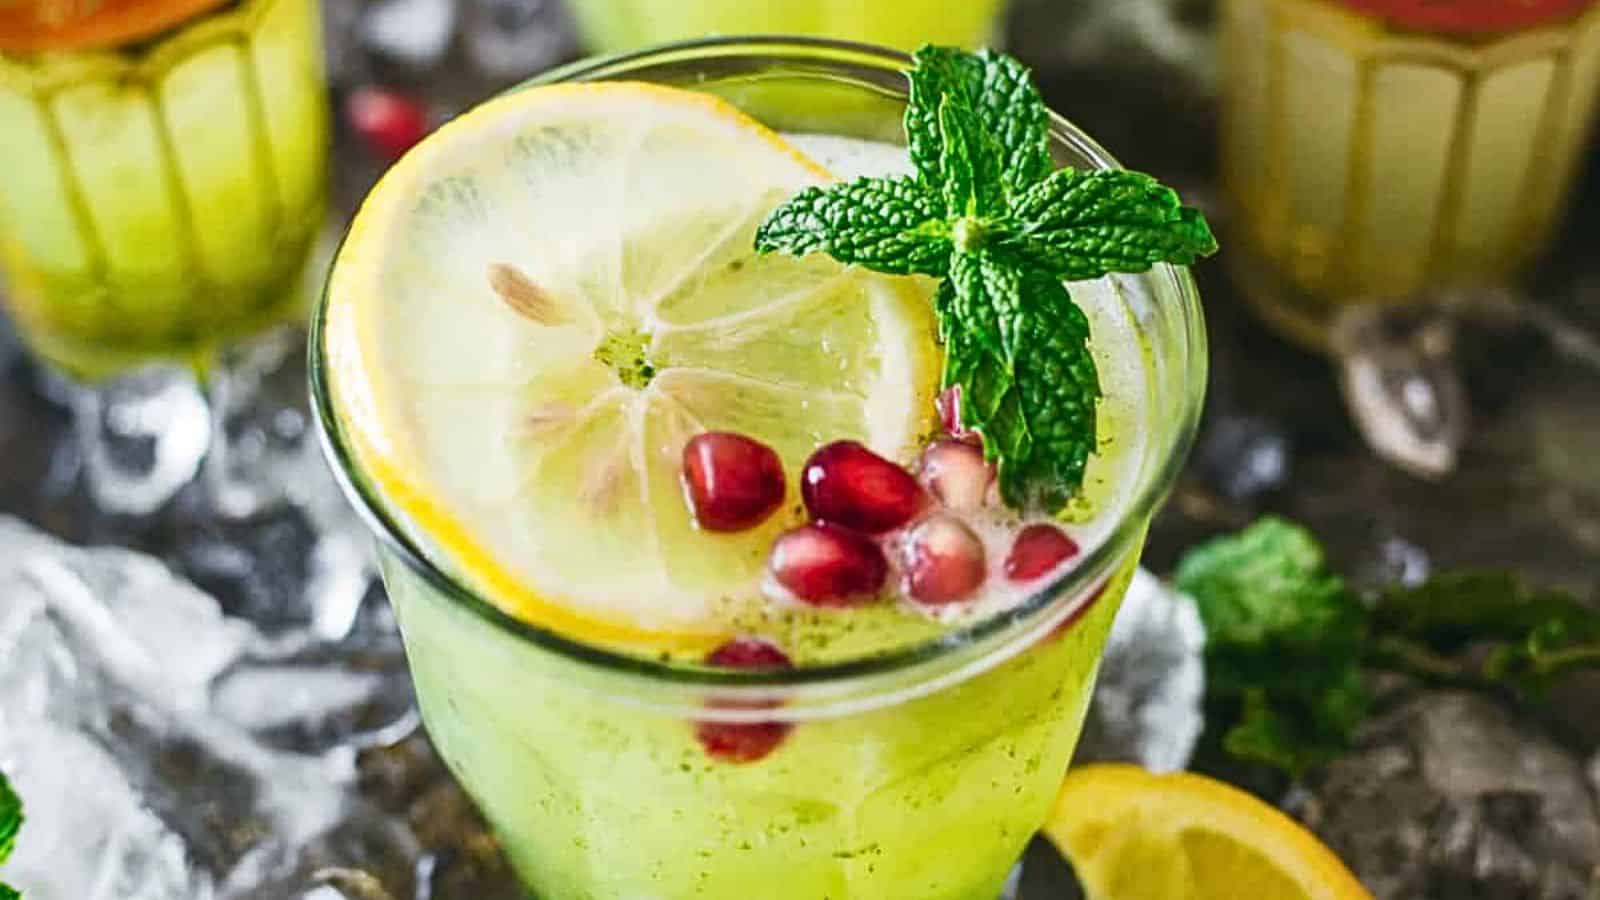 A glass of lemonade with pomegranate and mint leaves.